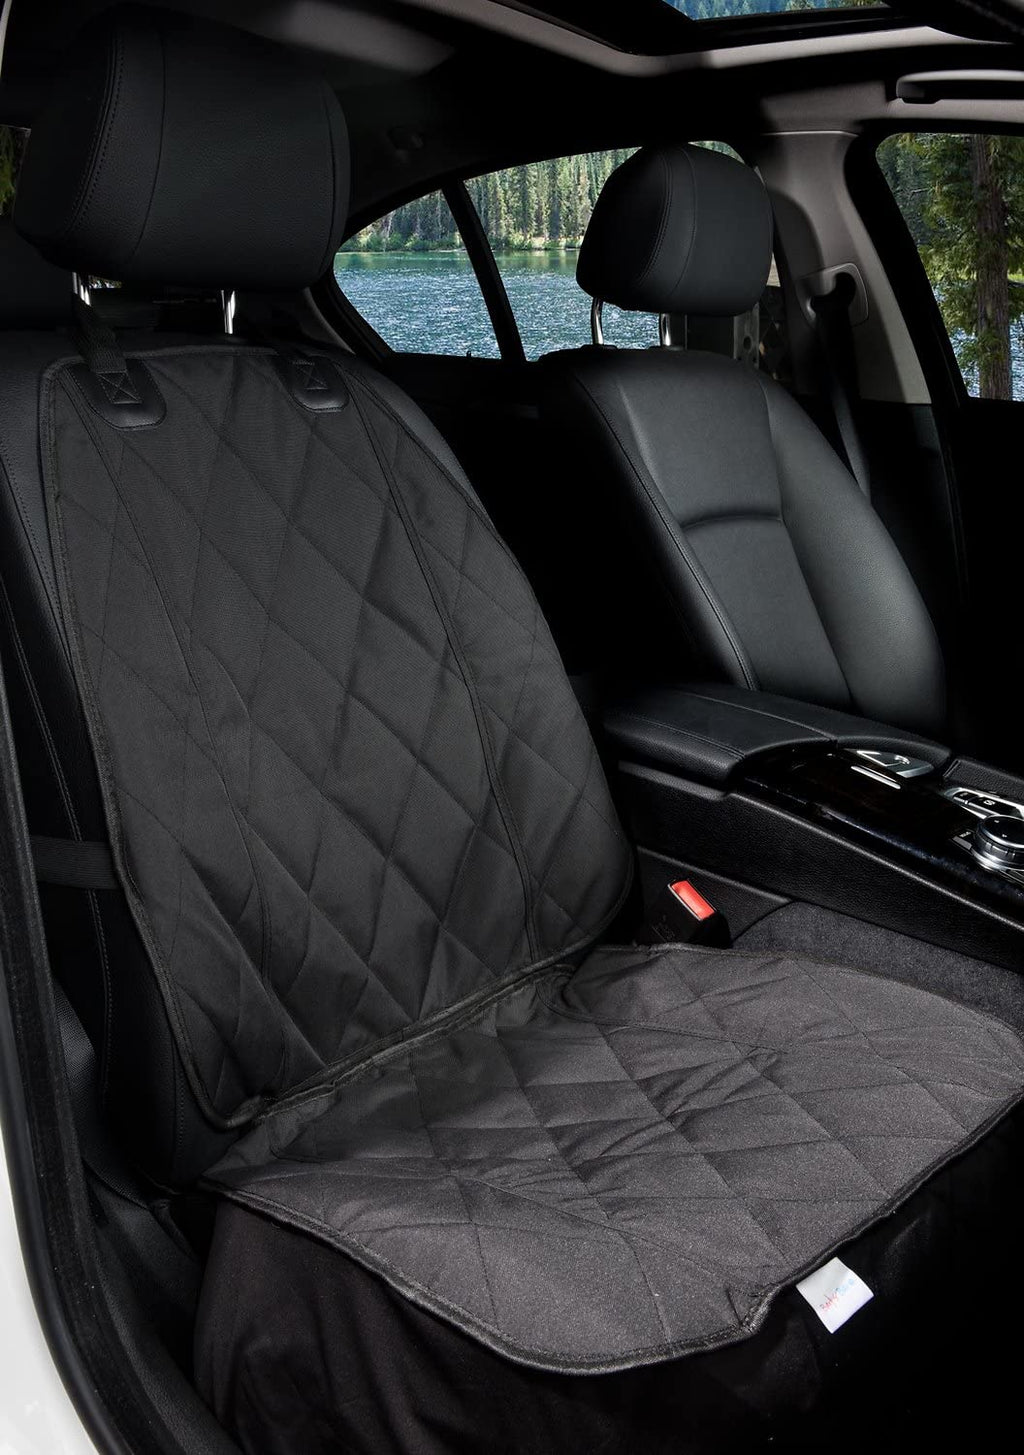 BarksBar Pet Padded Scratchproof Front Seat Cover with Seat Anchor for Cars, Trucks, & SUVs, Water Resistant, Machine Washable & Non-Slip - Quilted Black Universal fit - PawsPlanet Australia